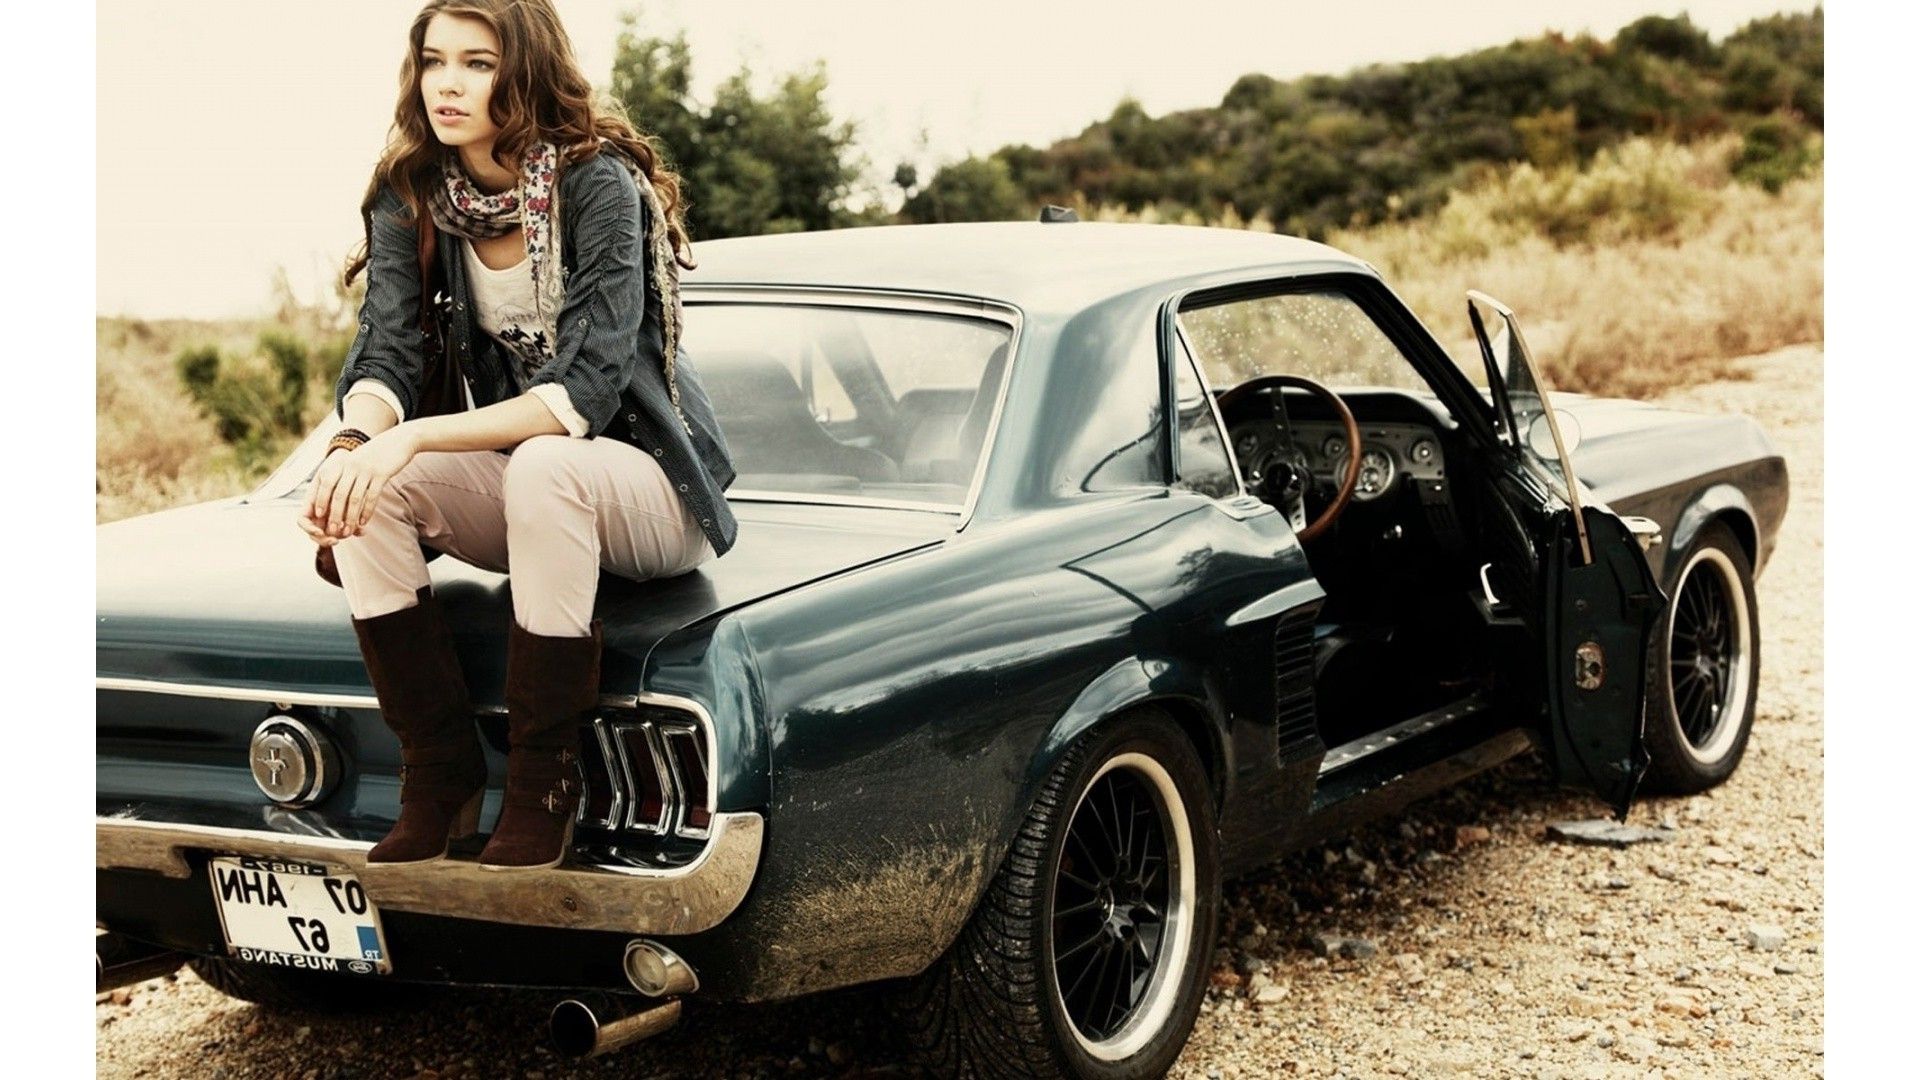 women, Car, Old Car, Classic Car, Women With Cars Wallpaper HD / Desktop and Mobile Background